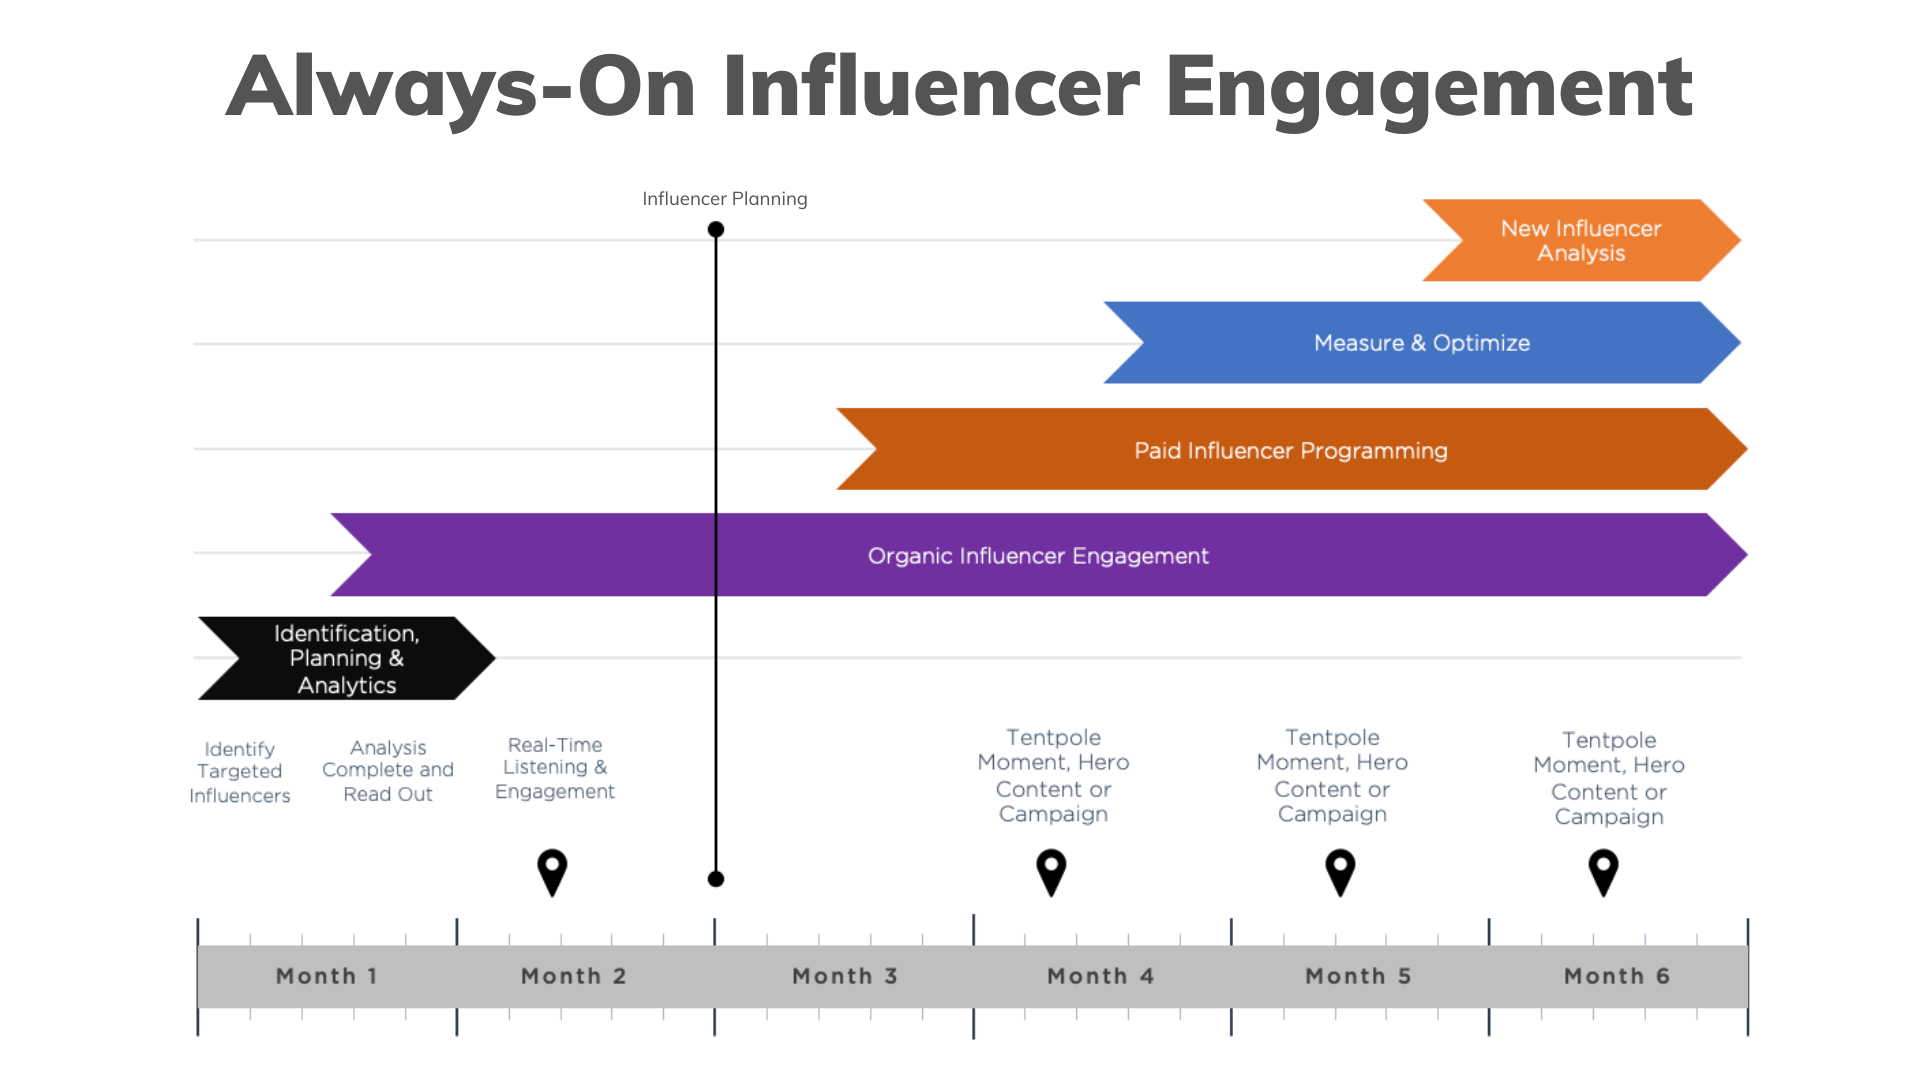 An organic influencer engagement should always be turned on, especially if you have staffing resources and a budget.